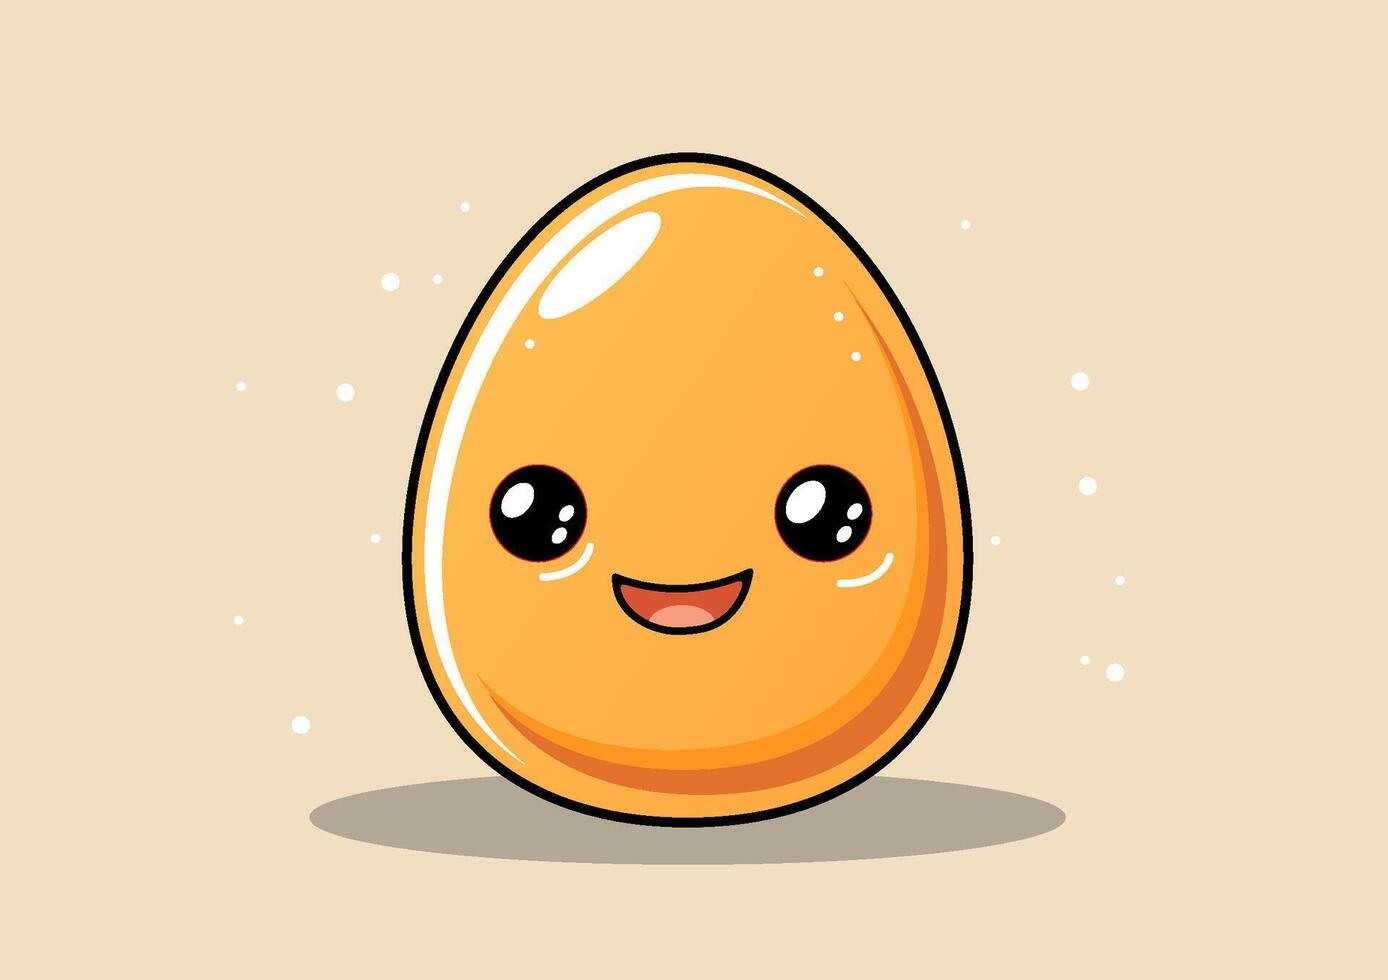 Cartoon vector illustration of a smiling chicken egg. This cheerful artwork captures the whimsical charm of a happy egg, perfect for cartoon illustrations and vector graphics